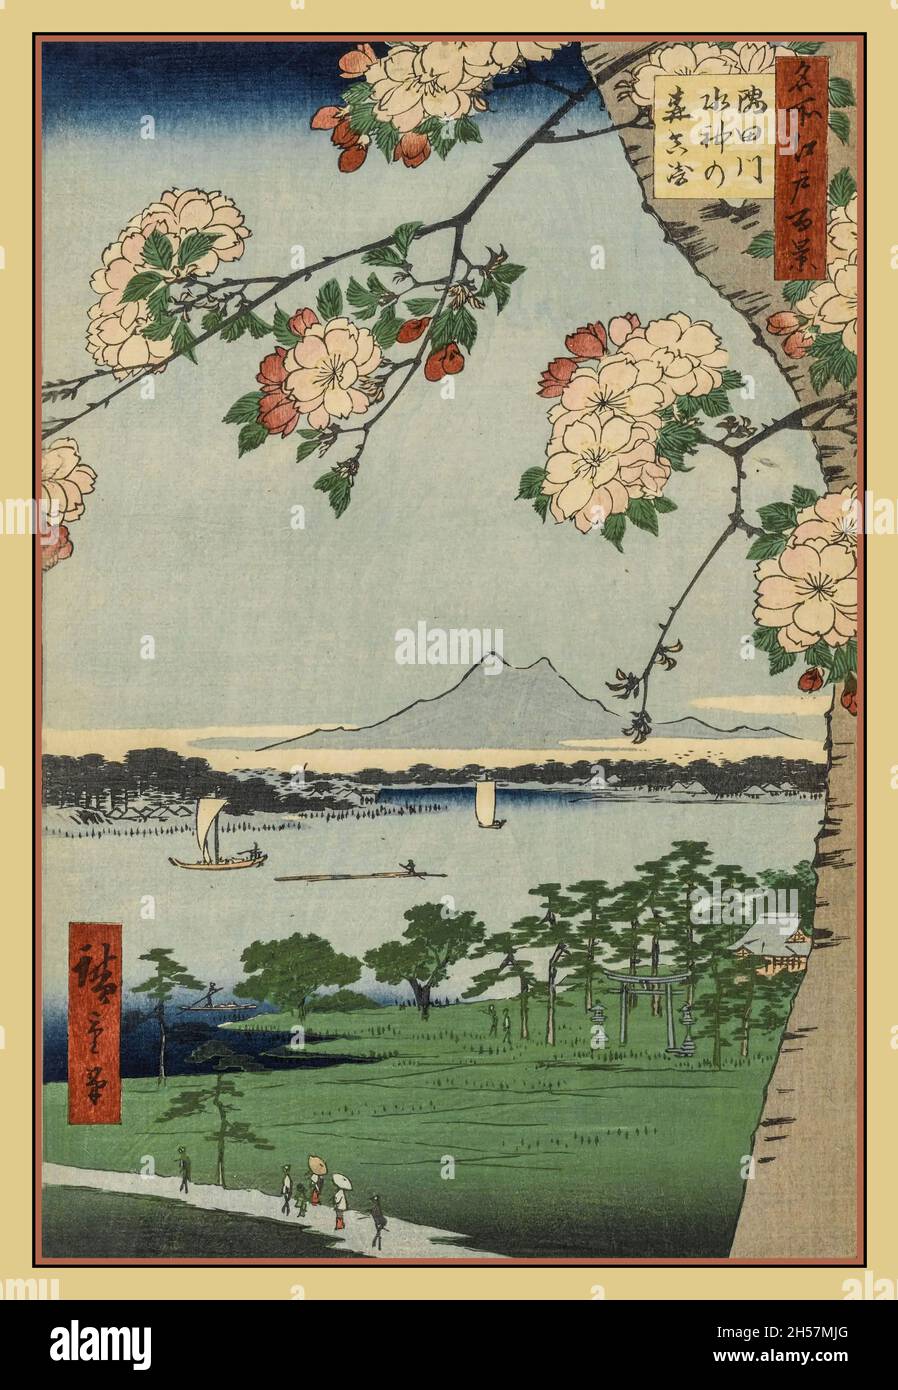 HIROSHIGE UKIYO-E ARTIST 100 Famous views of Edo by Hiroshige Suijin Shrine and Massaki on the Sumida River. People at the bottom of the print are on the way to the Hashiba ferry Utagawa Hiroshige, born Andō Hiroshige, was a Japanese ukiyo-e artist, considered the last great master of that tradition. Hiroshige is best known for his vertical-format landscape series One Hundred Famous Views of Edo.  Suijin Shrine and Massaki on the Sumida River is number 35 of the 118 woodblock prints constituting Hiroshige's series One Hundred Famous Views of Edo. Stock Photo